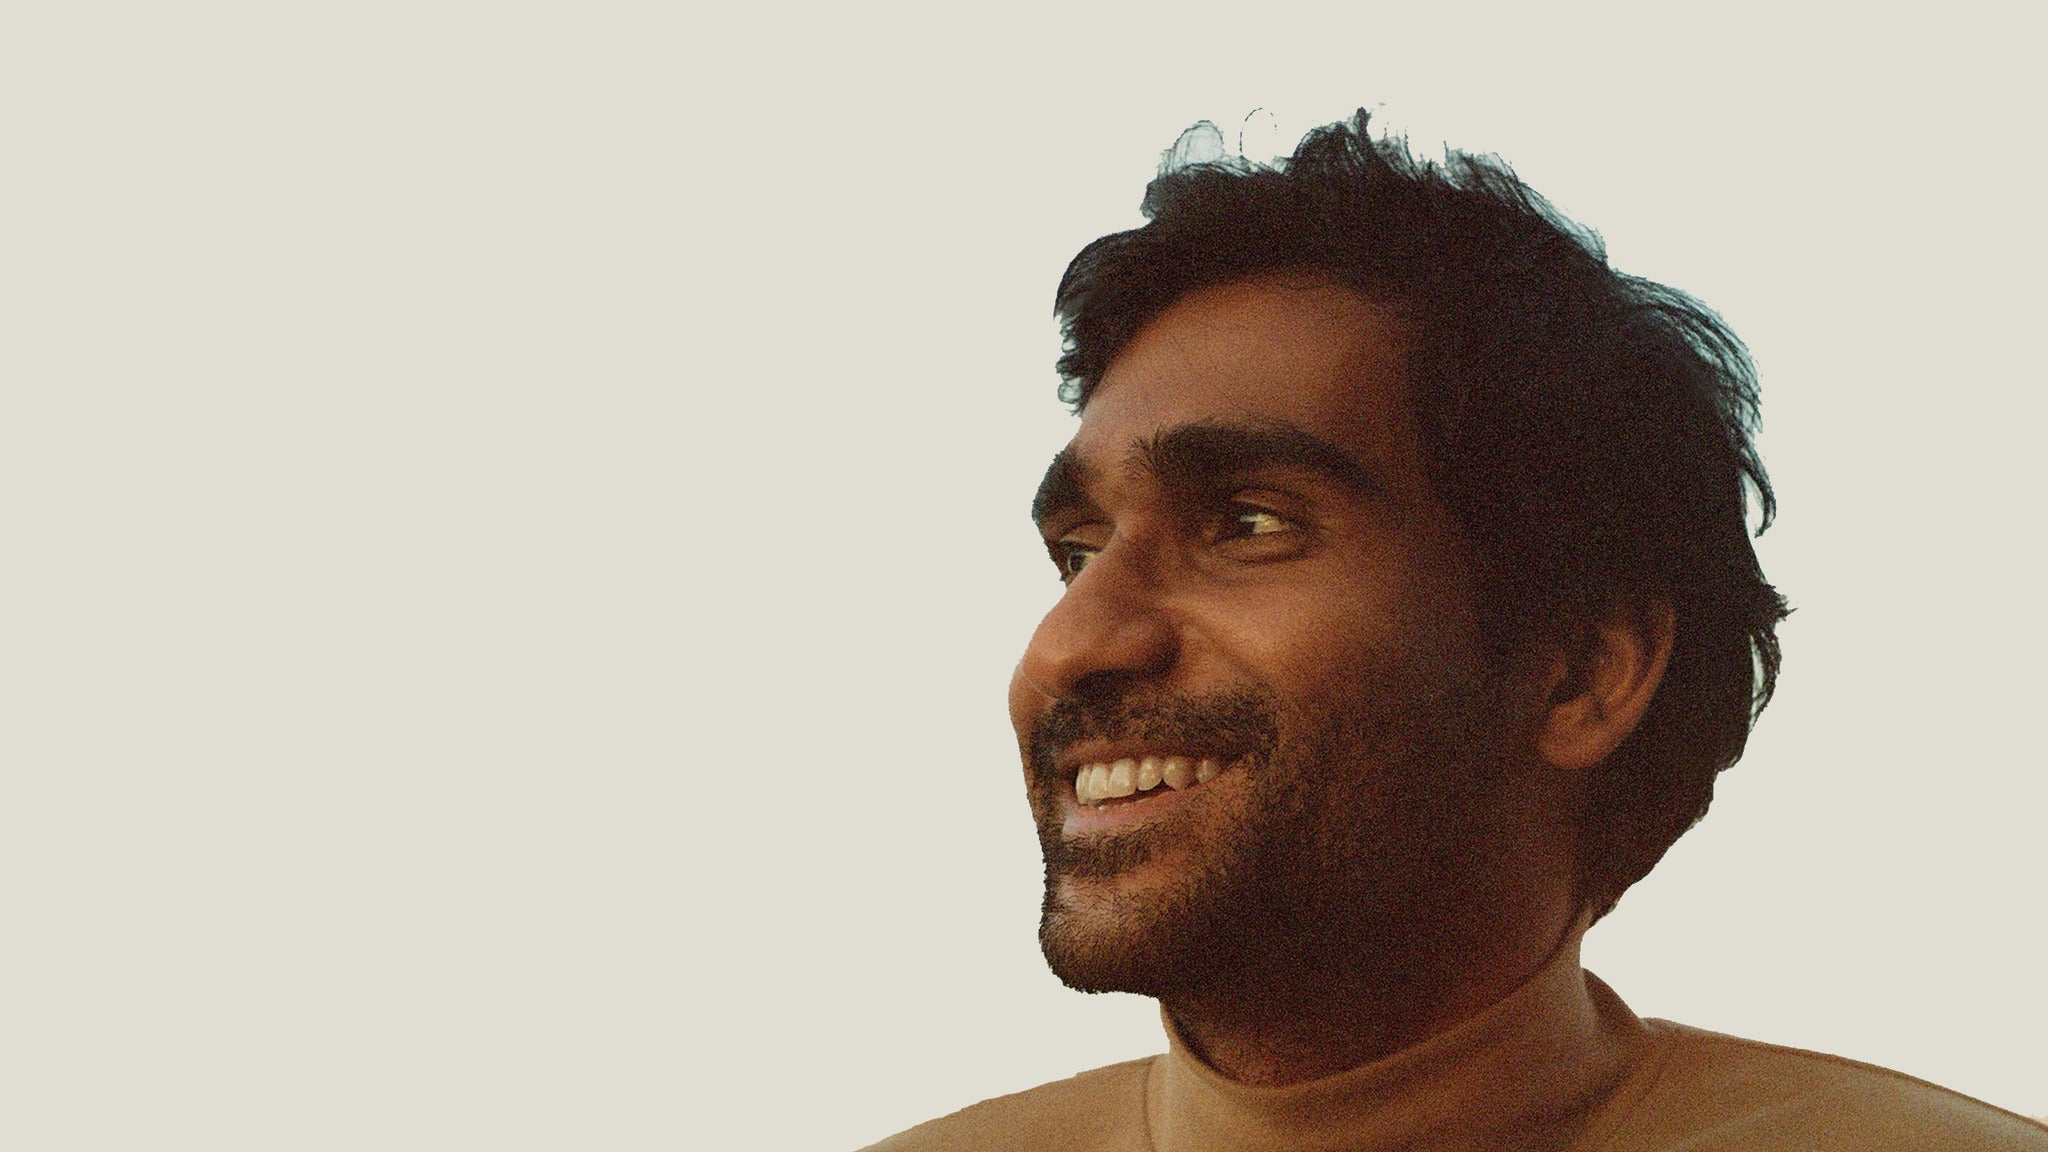 Prateek Kuhad presale password for early tickets in Toronto